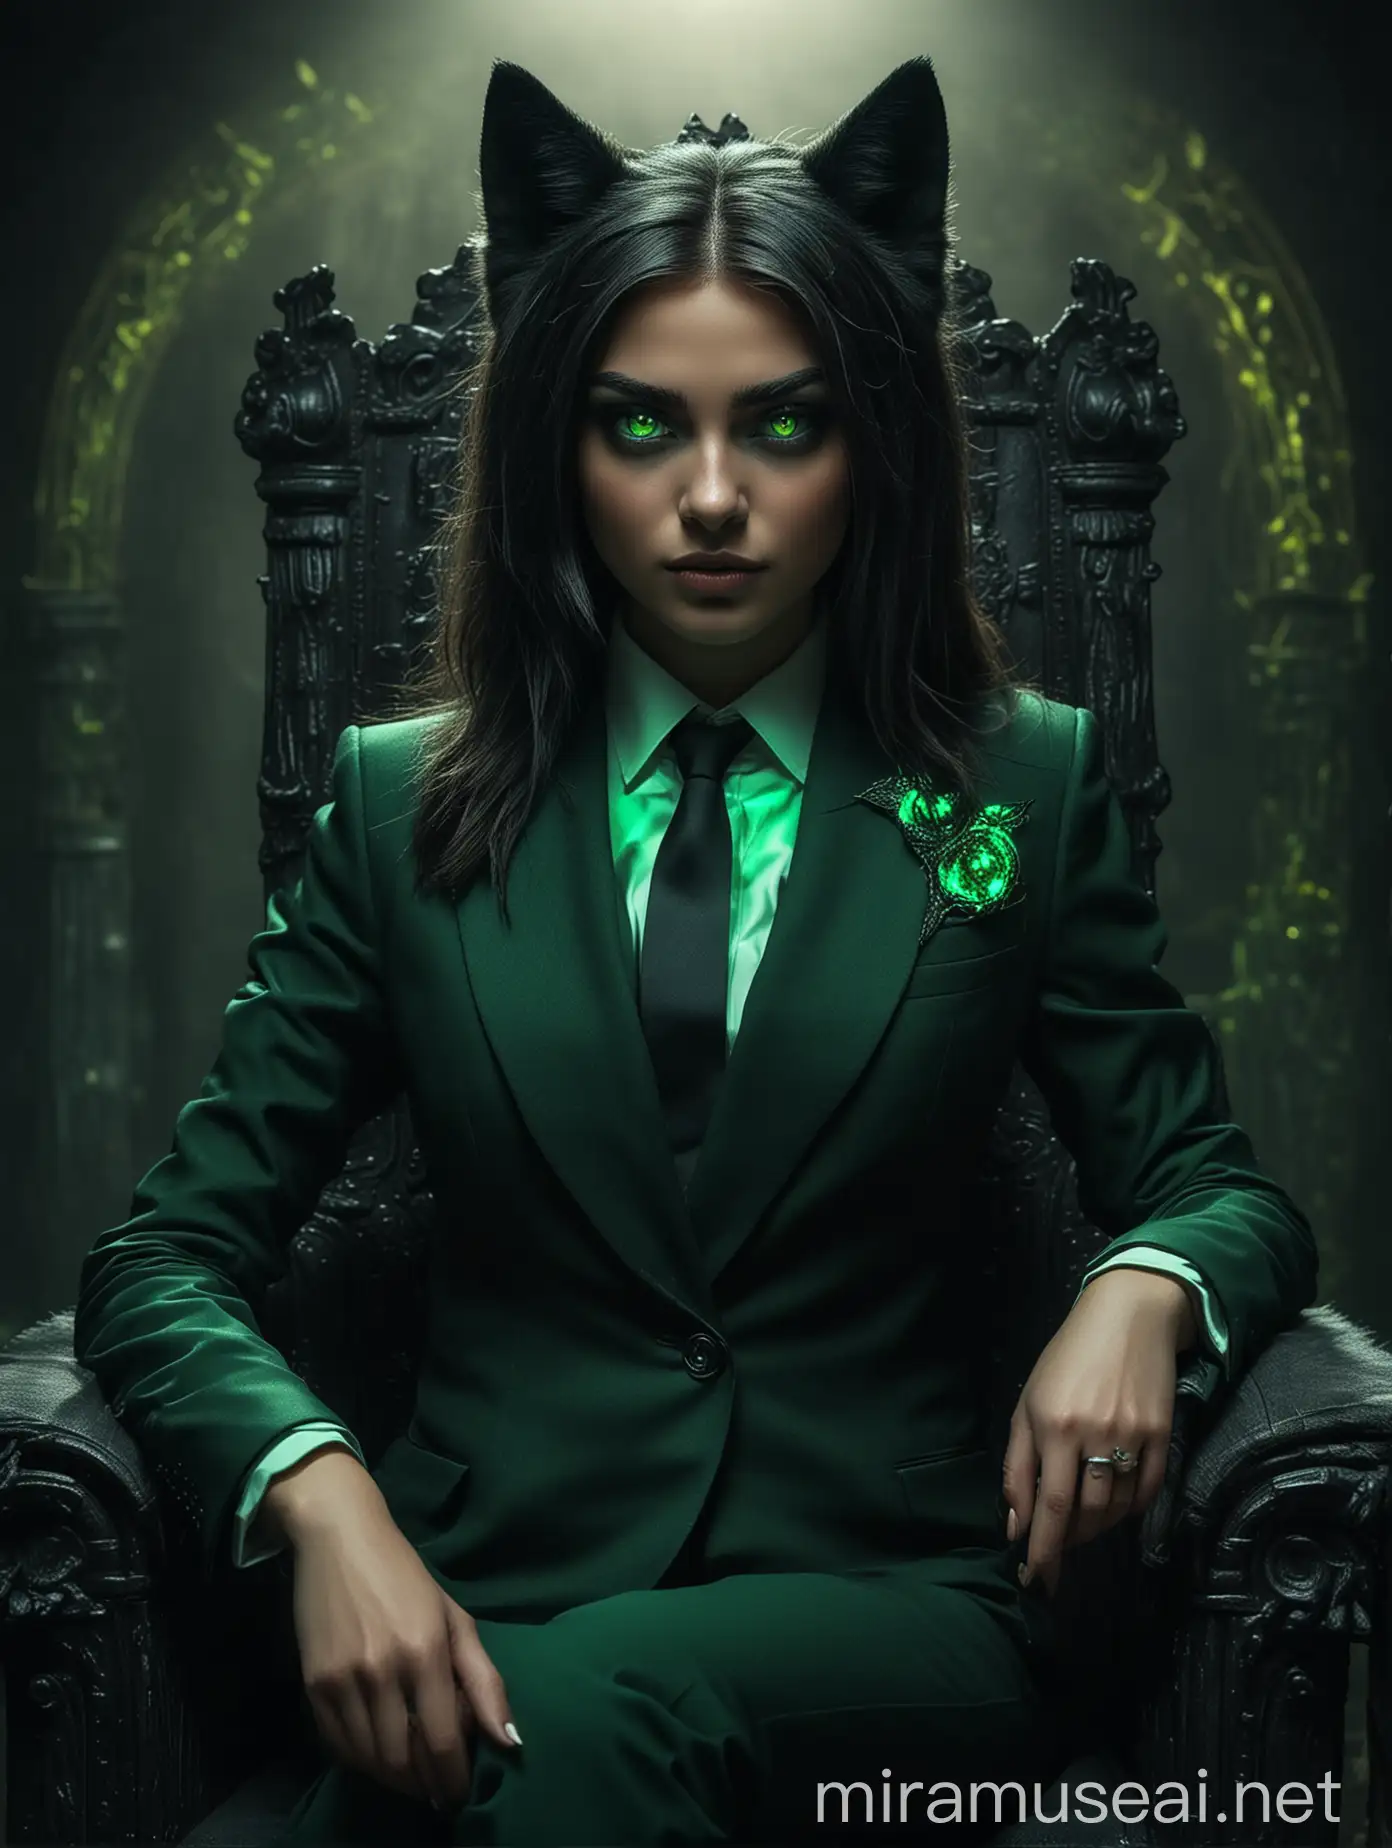 A beautiful woman in suit and green glowing eyes posing on a throne with pride, with a black big green eye wolf beside her, in a dark environment